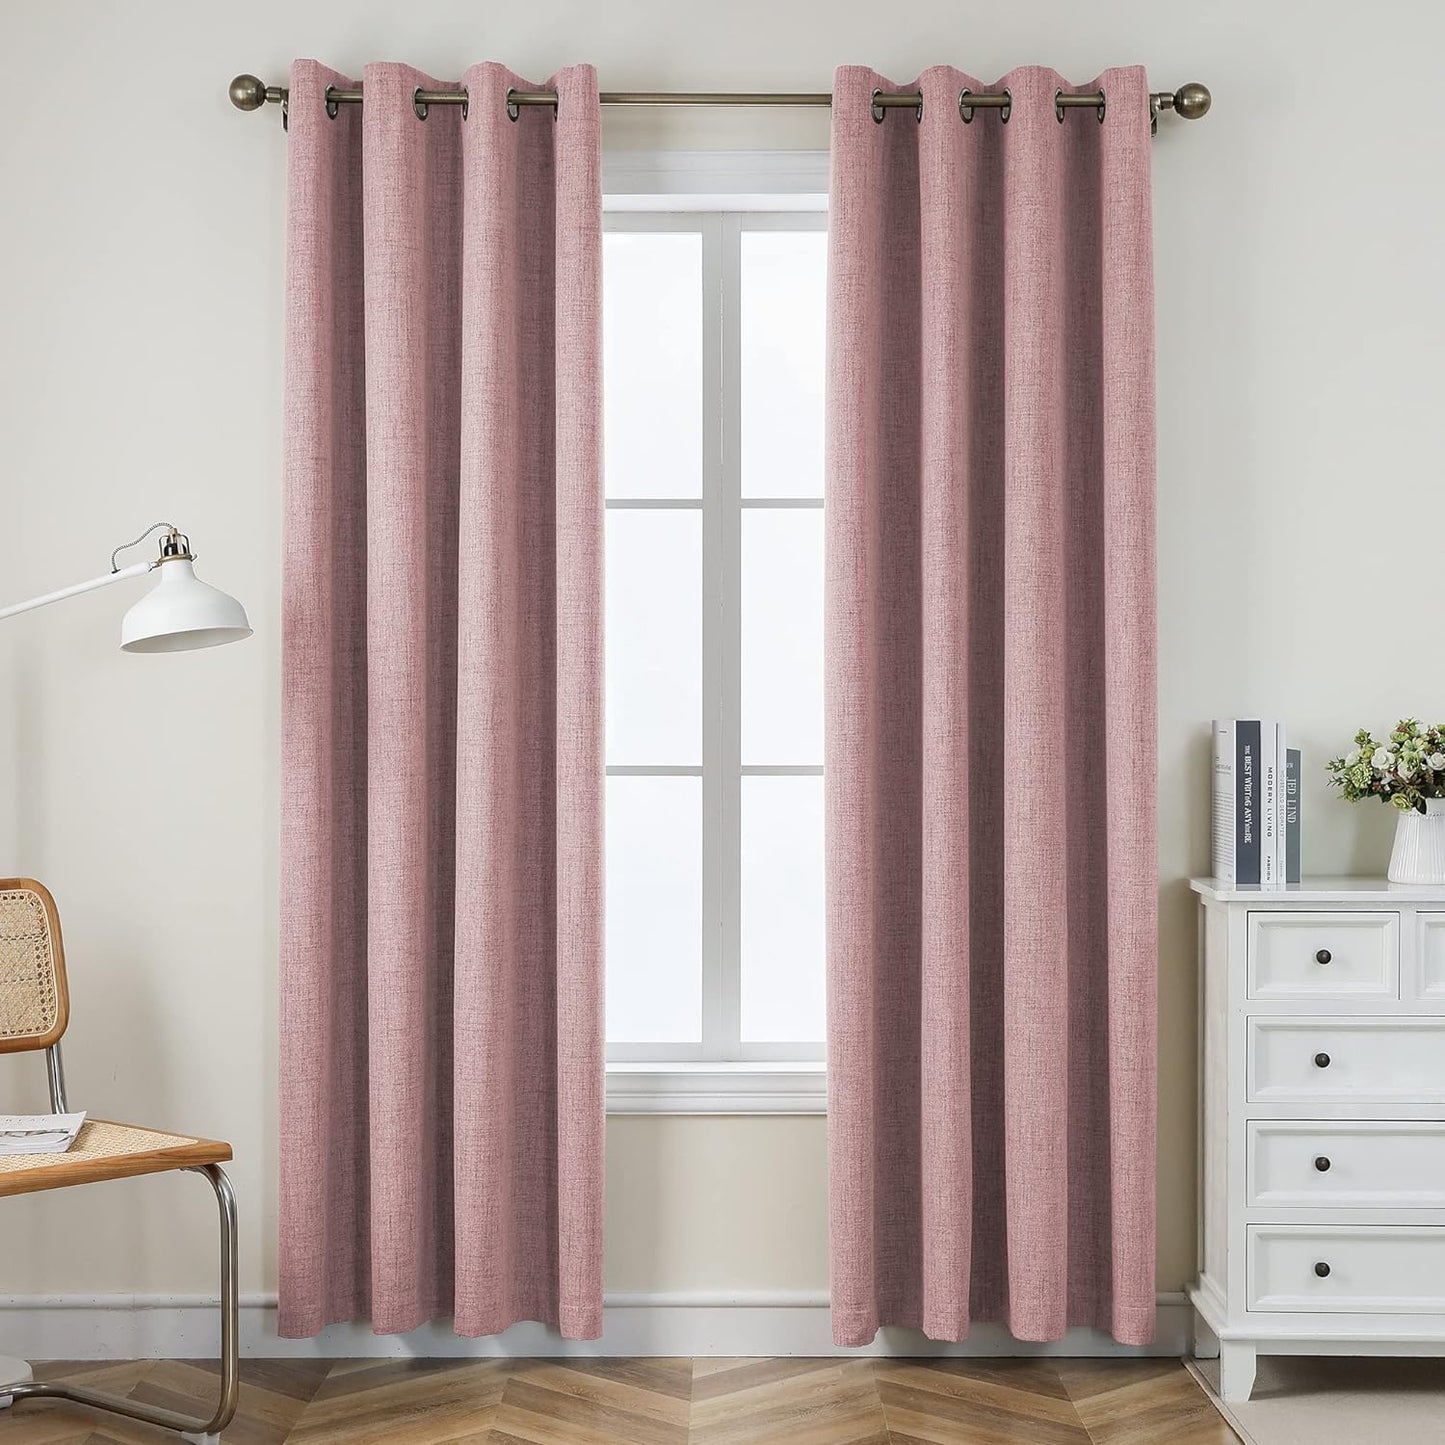 CUCRAF Full Blackout Window Curtains 84 Inches Long,Faux Linen Look Thermal Insulated Grommet Drapes Panels for Bedroom Living Room,Set of 2(52 X 84 Inches, Light Khaki)  CUCRAF Pink 52 X 95 Inches 